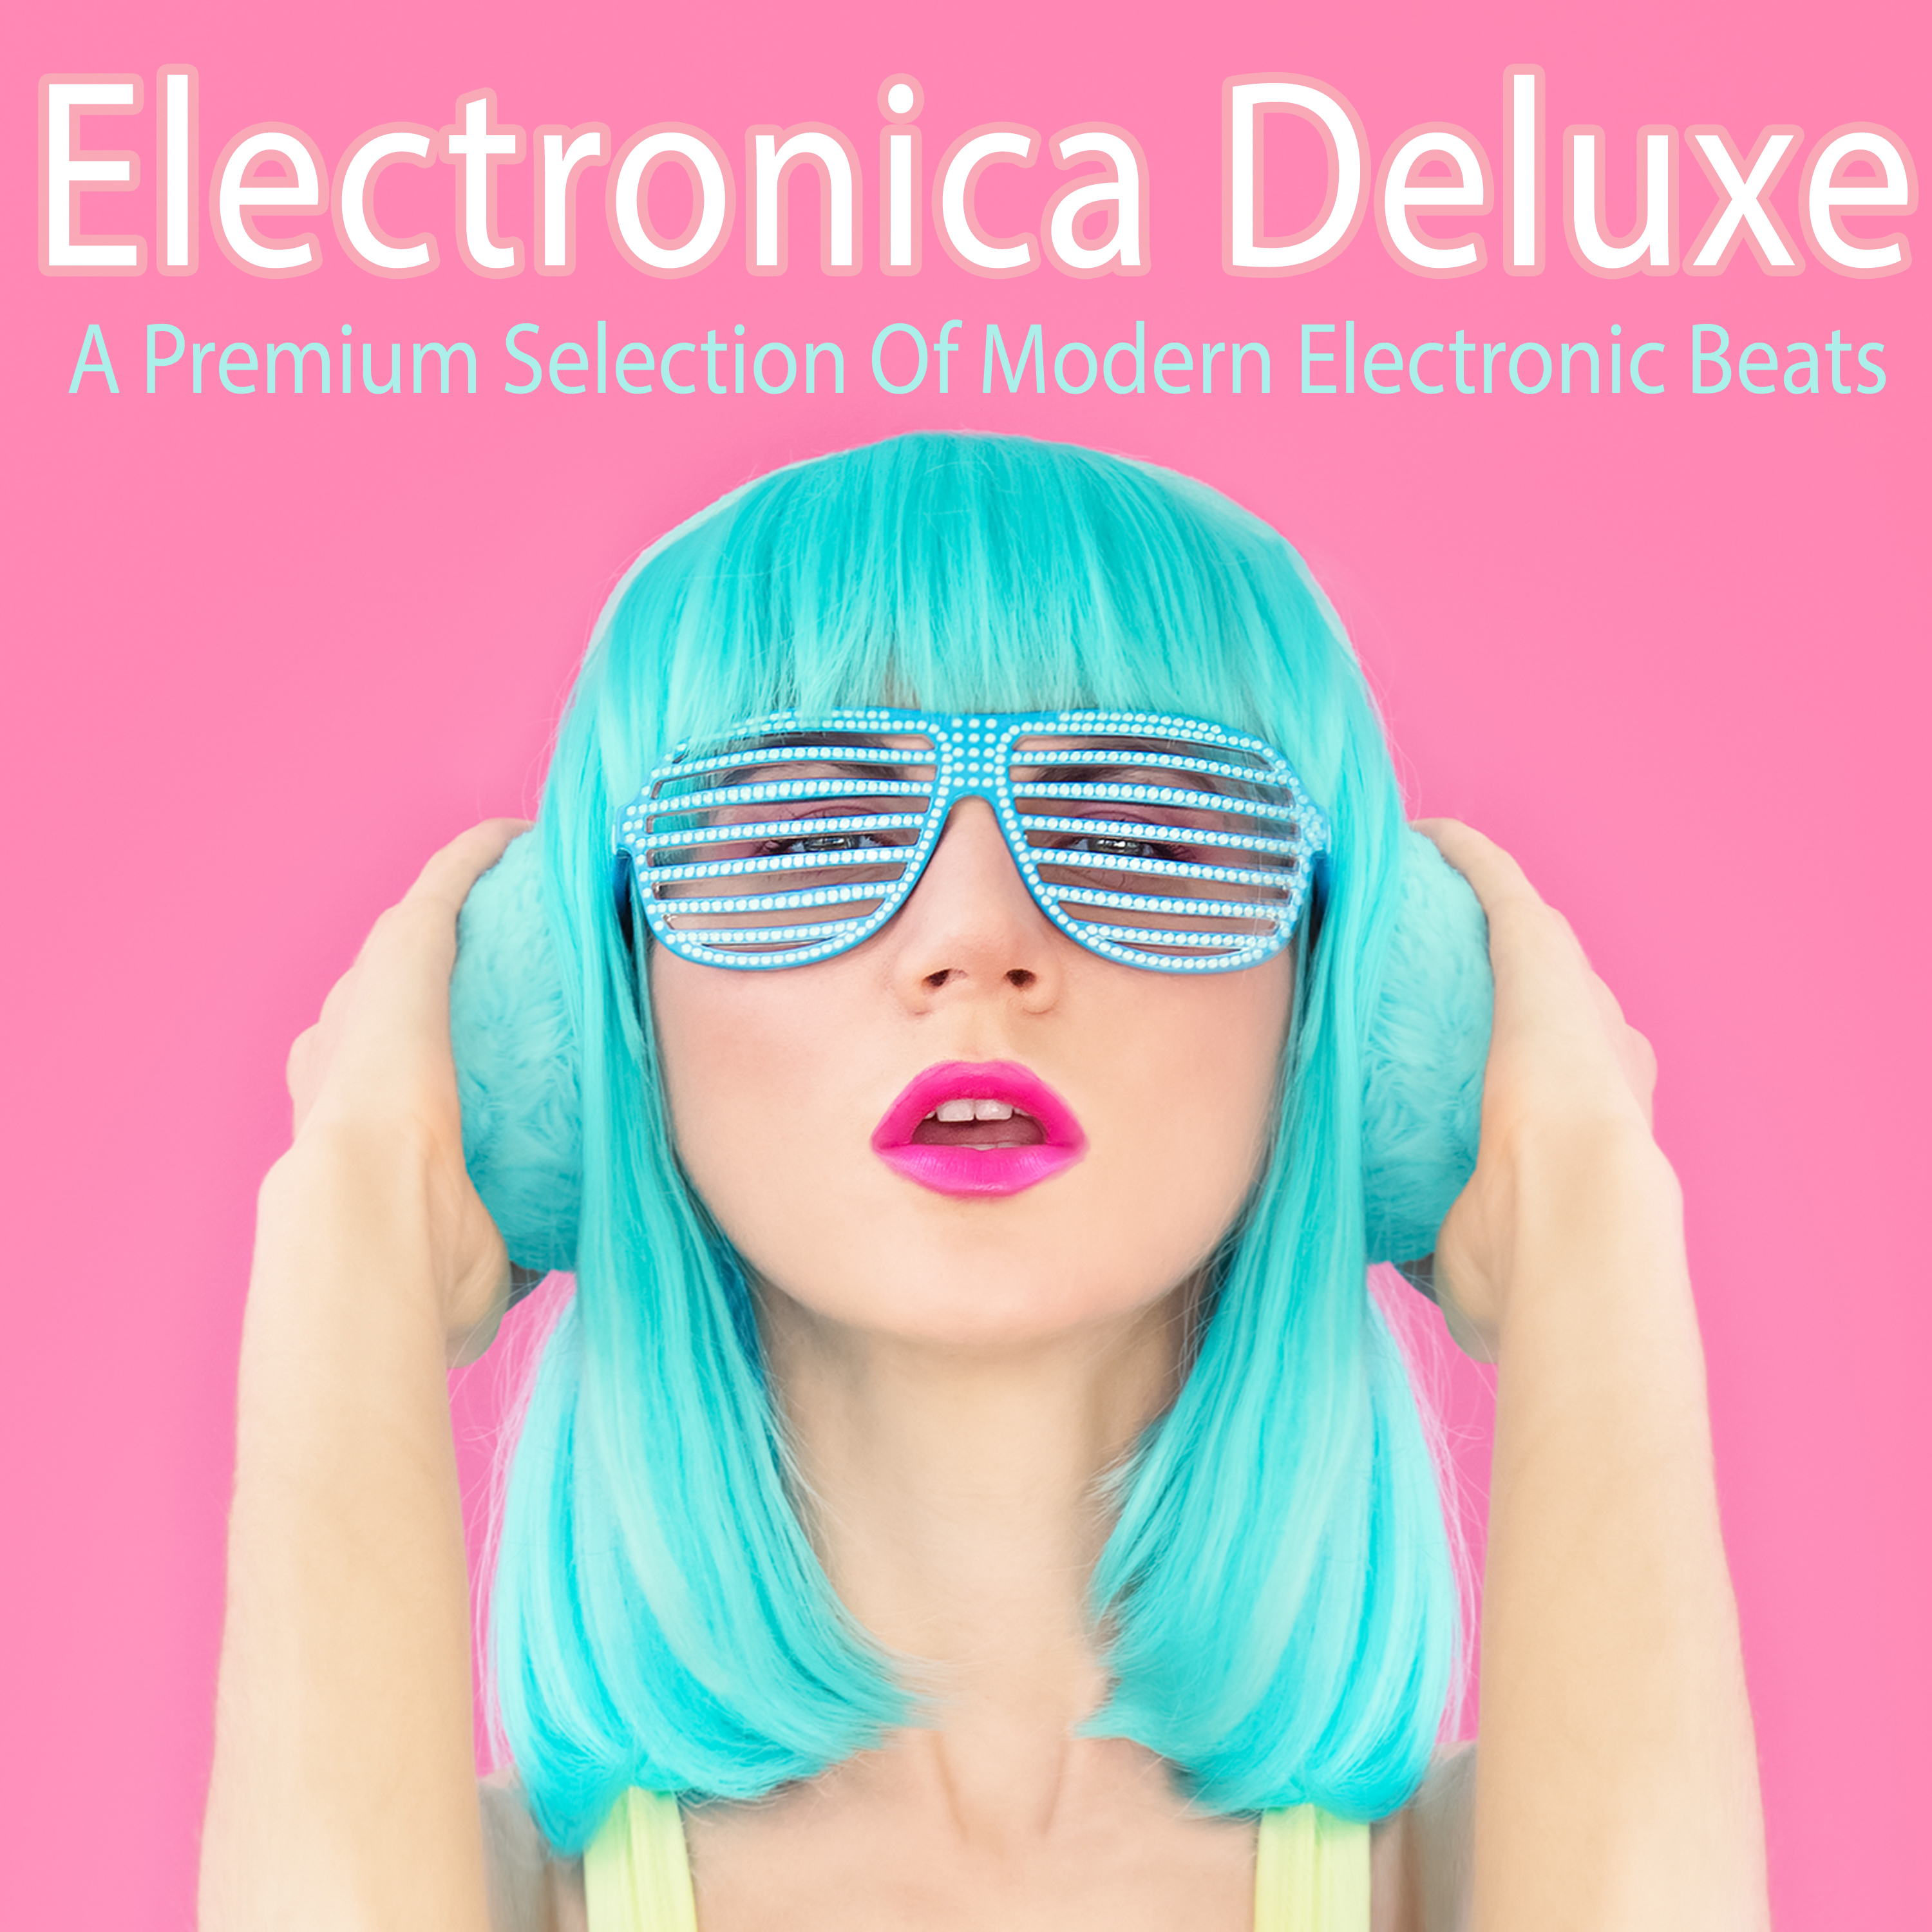 Electronica Deluxe - A Premium Selection of Modern Electronic Beats